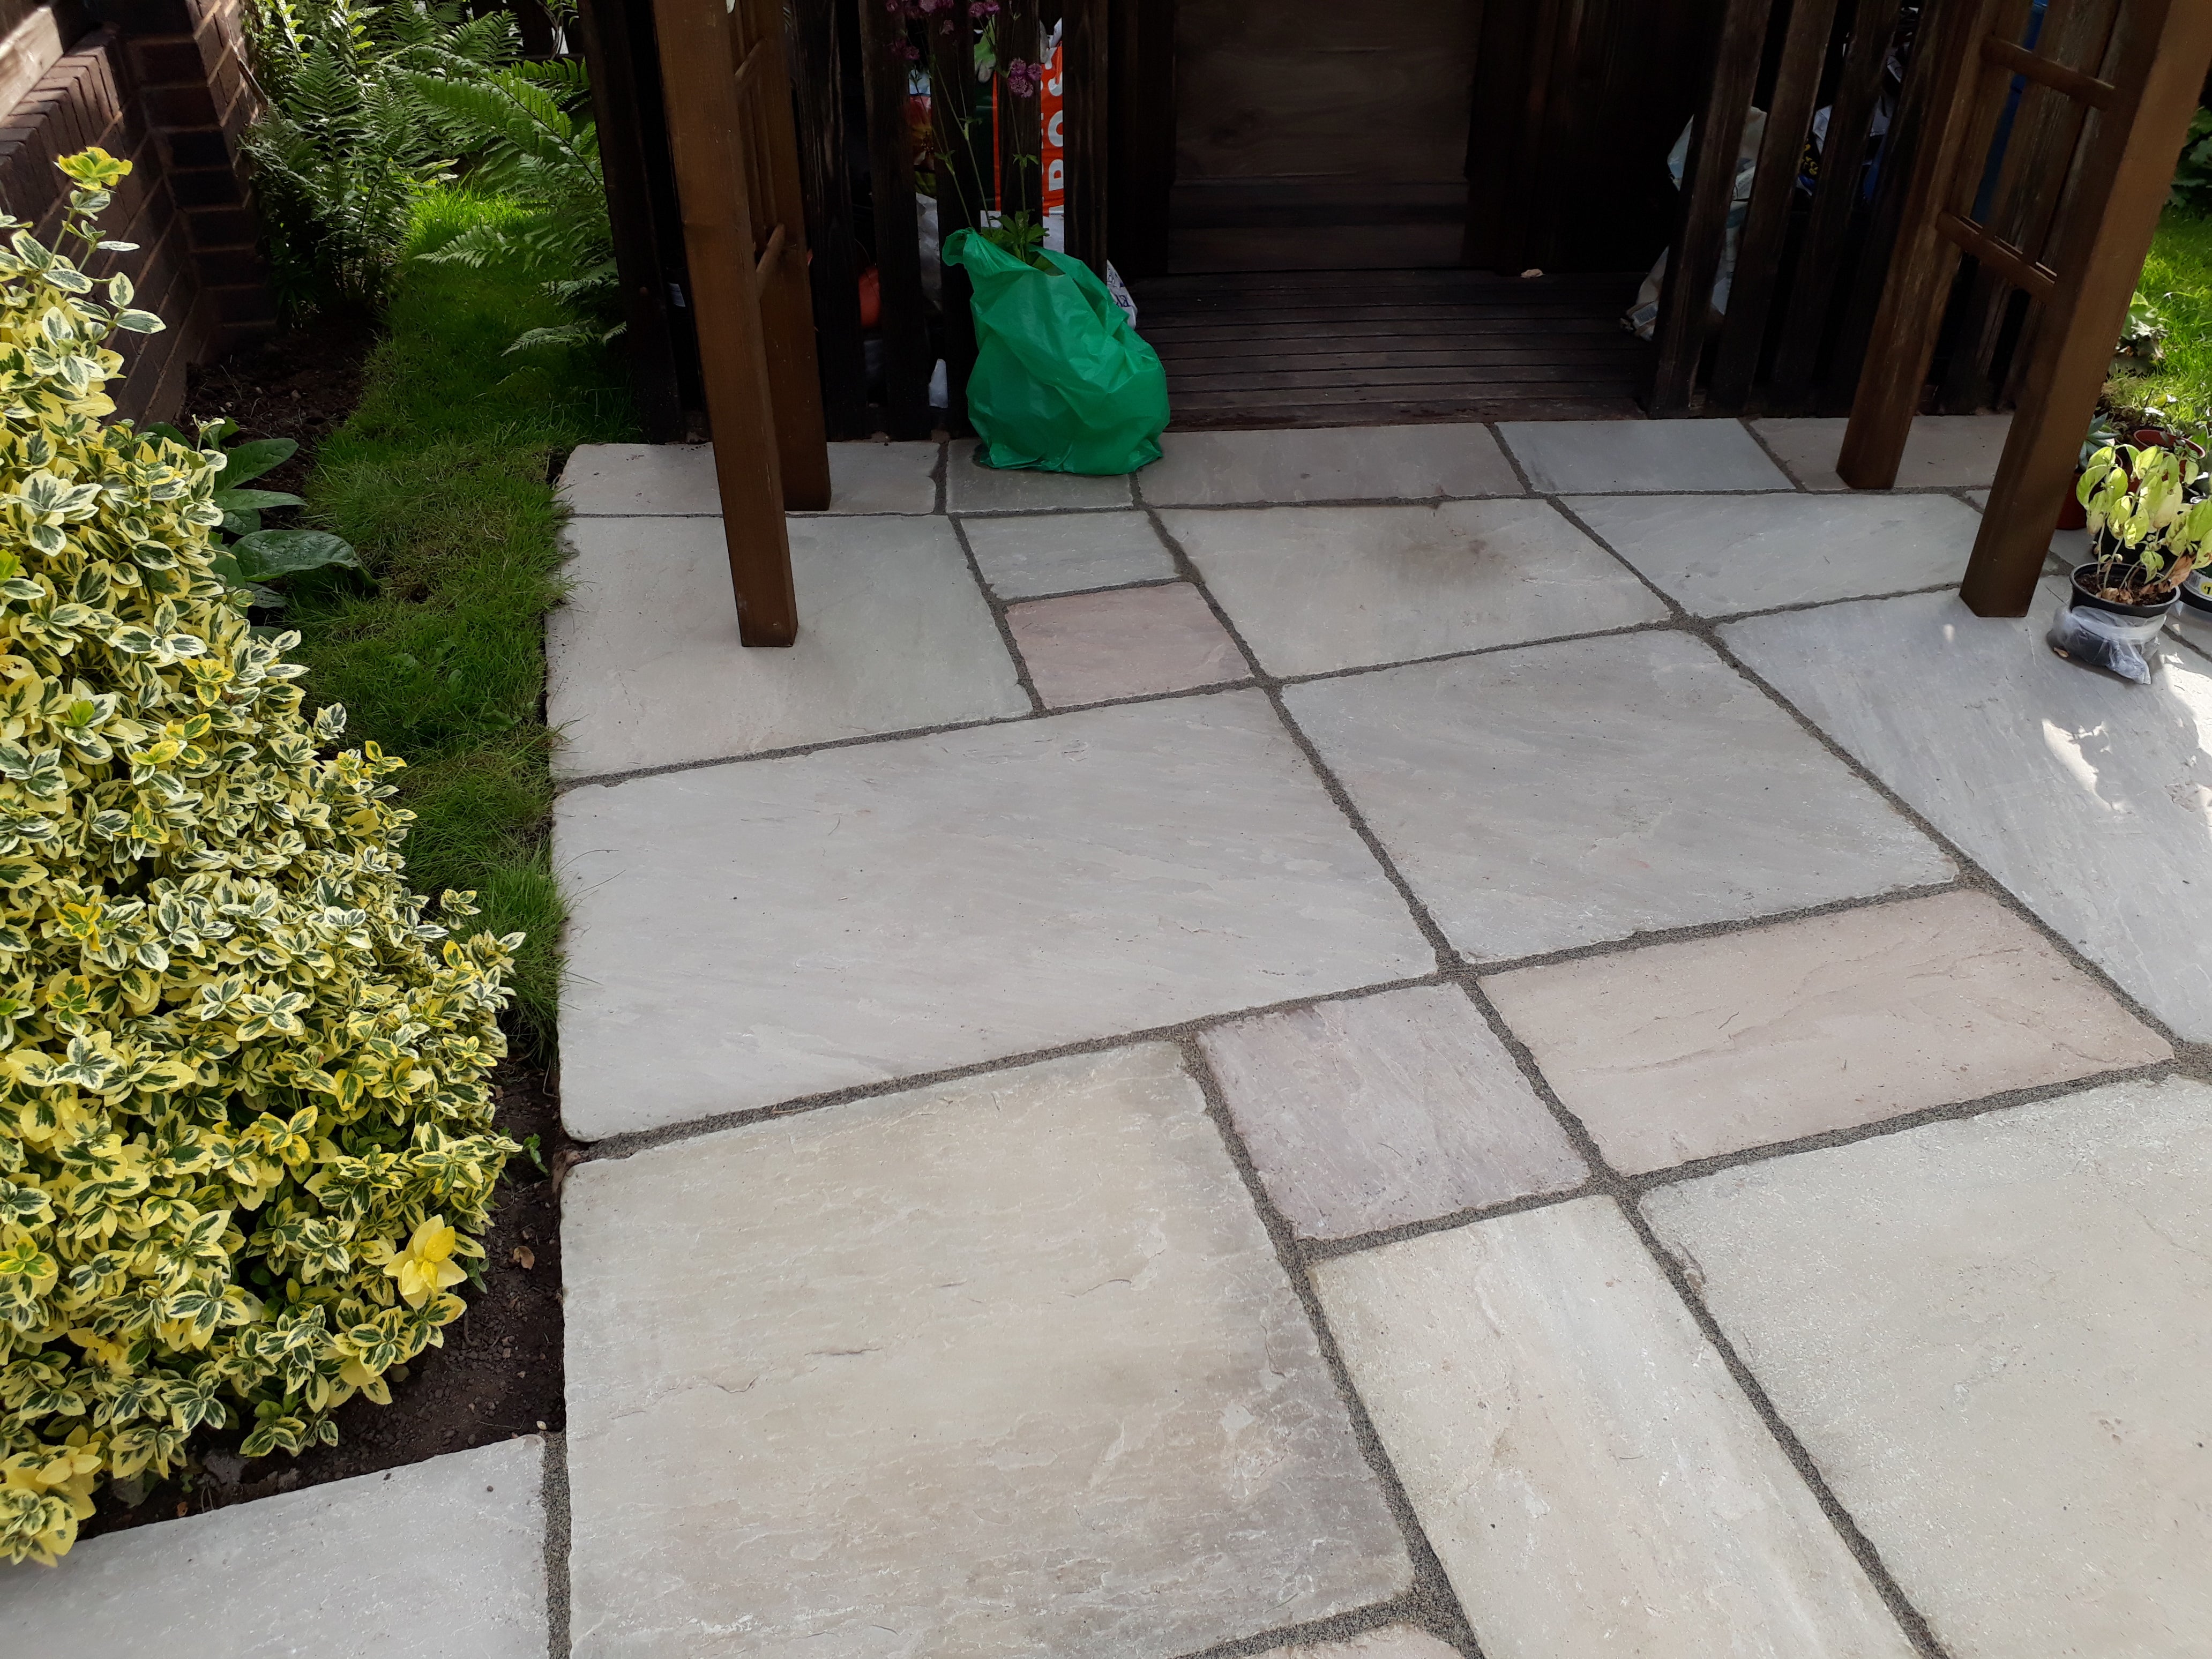 Raj Green Indian Sandstone Paving Slabs - Tumbled - Patio Pack - 22mm - Weathered Paving